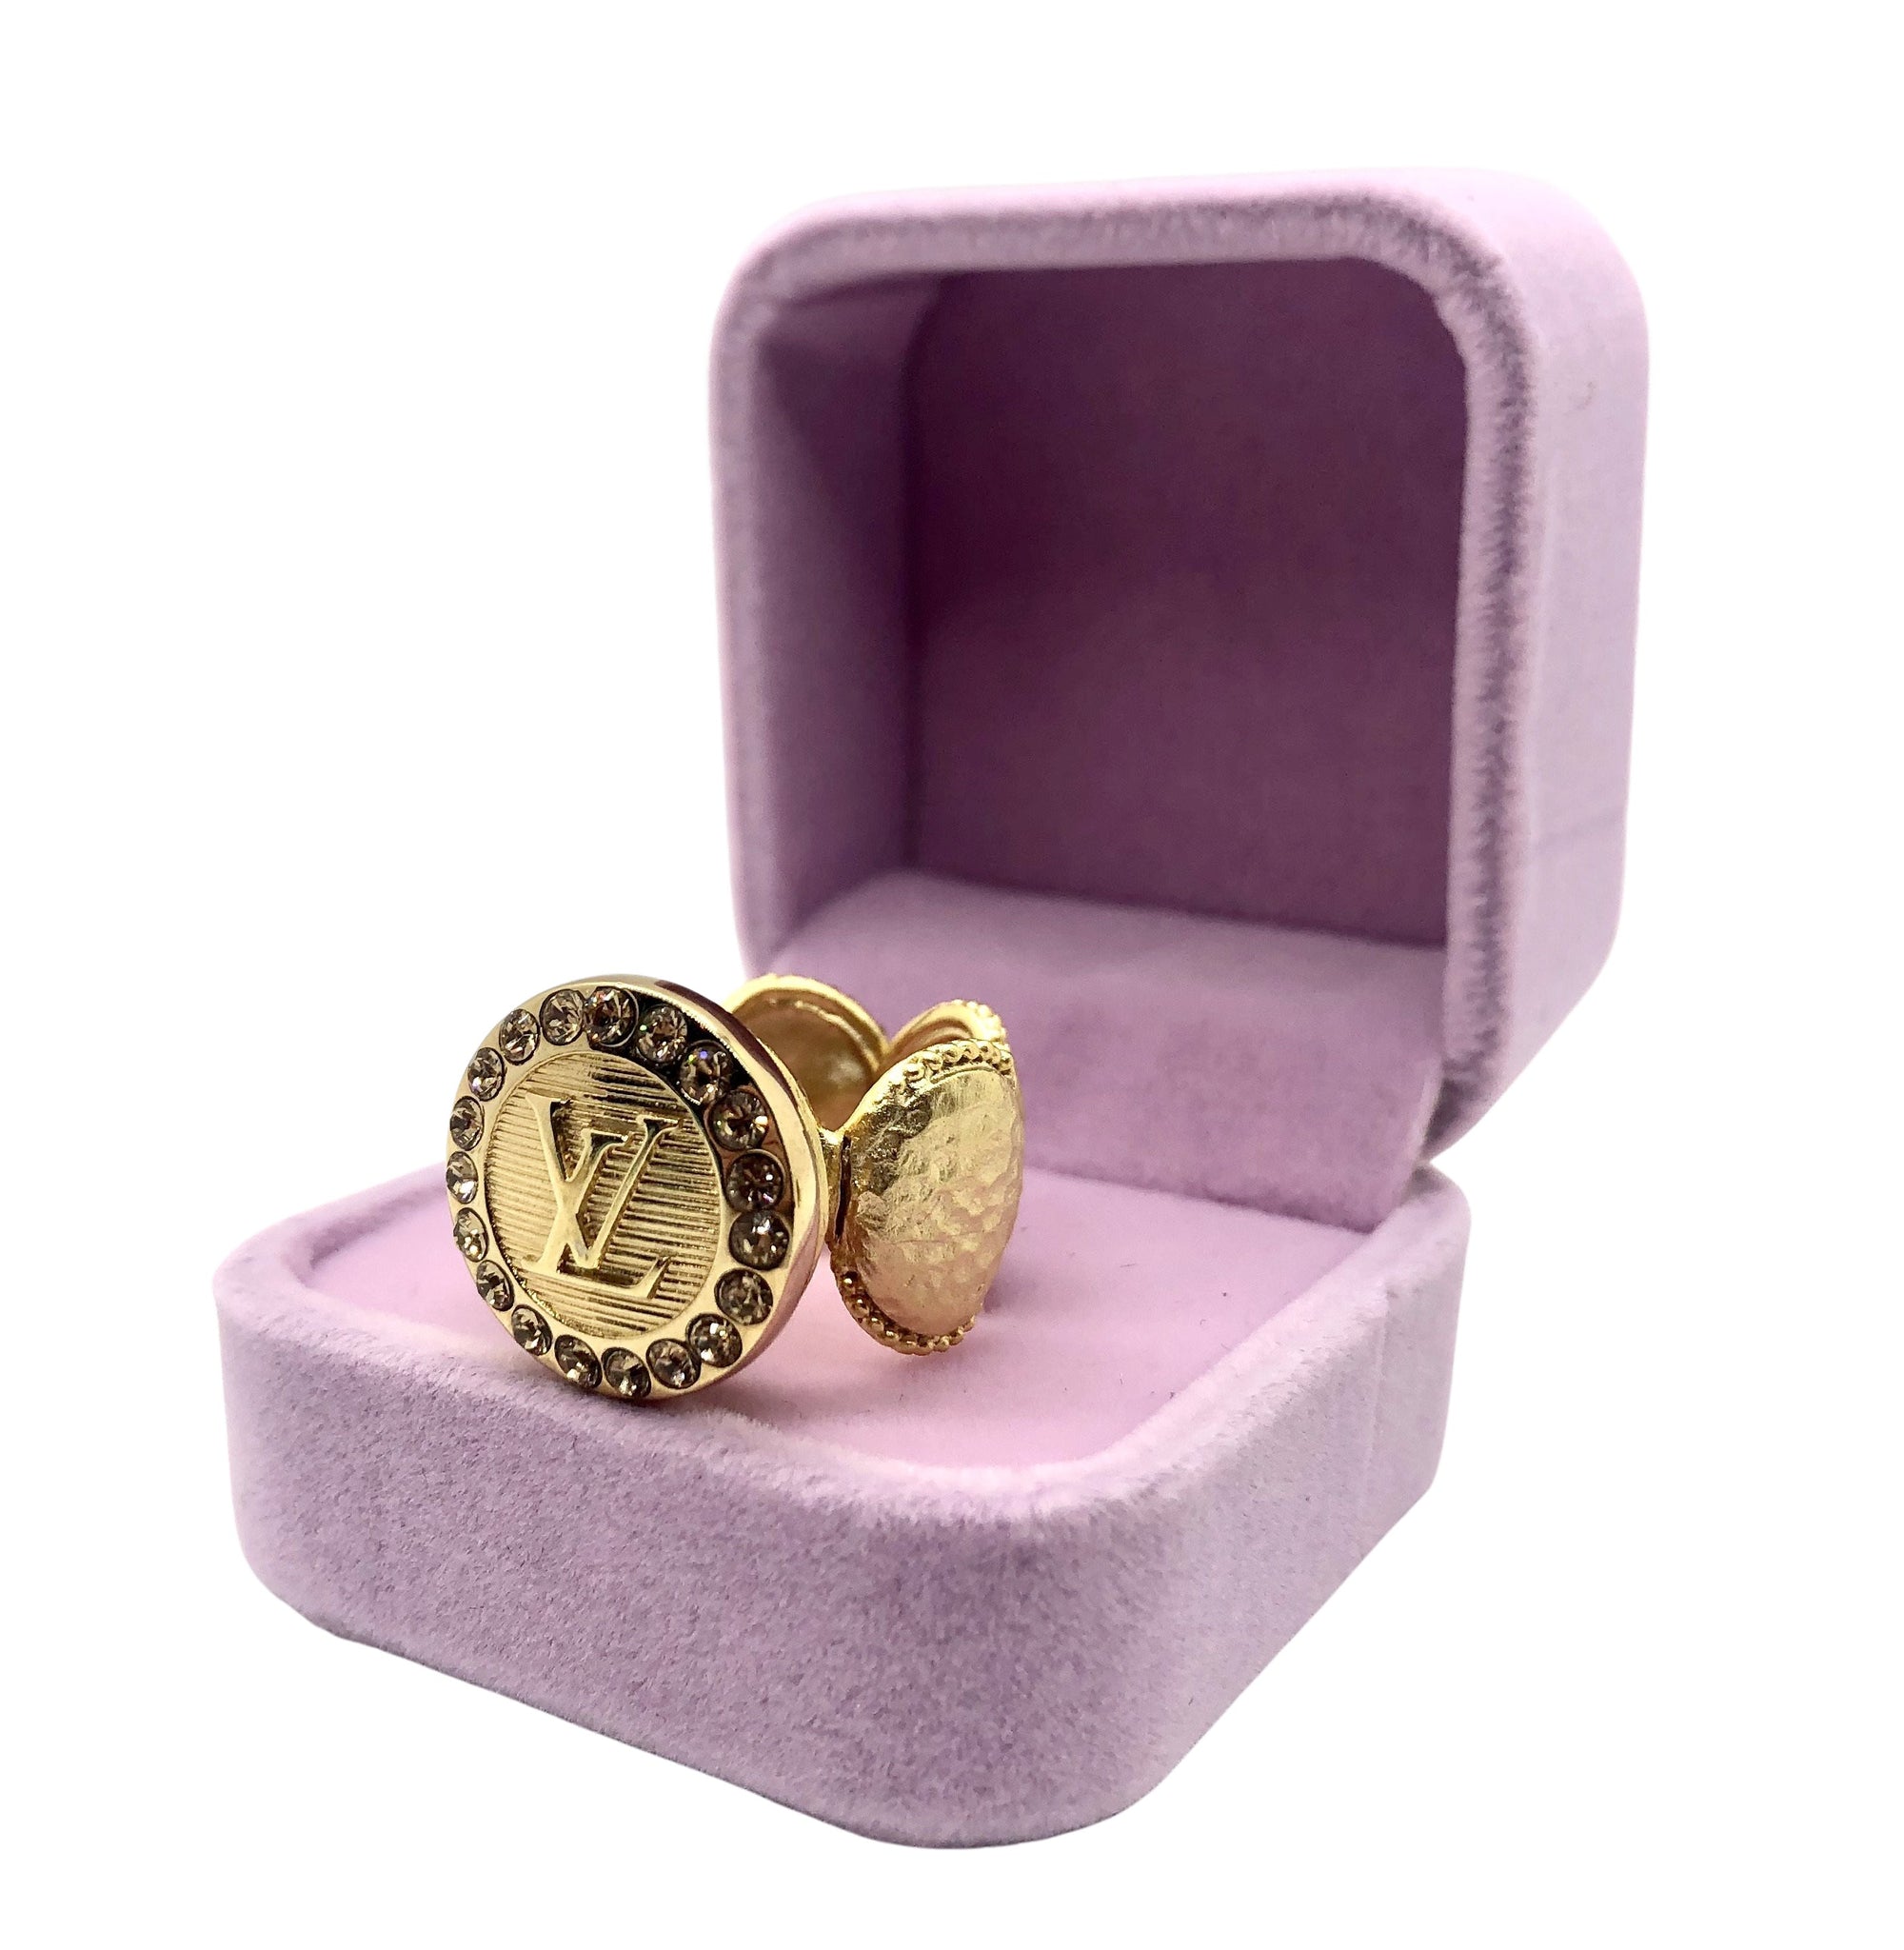 Louis Vuitton Authenticated Gold Plated Ring